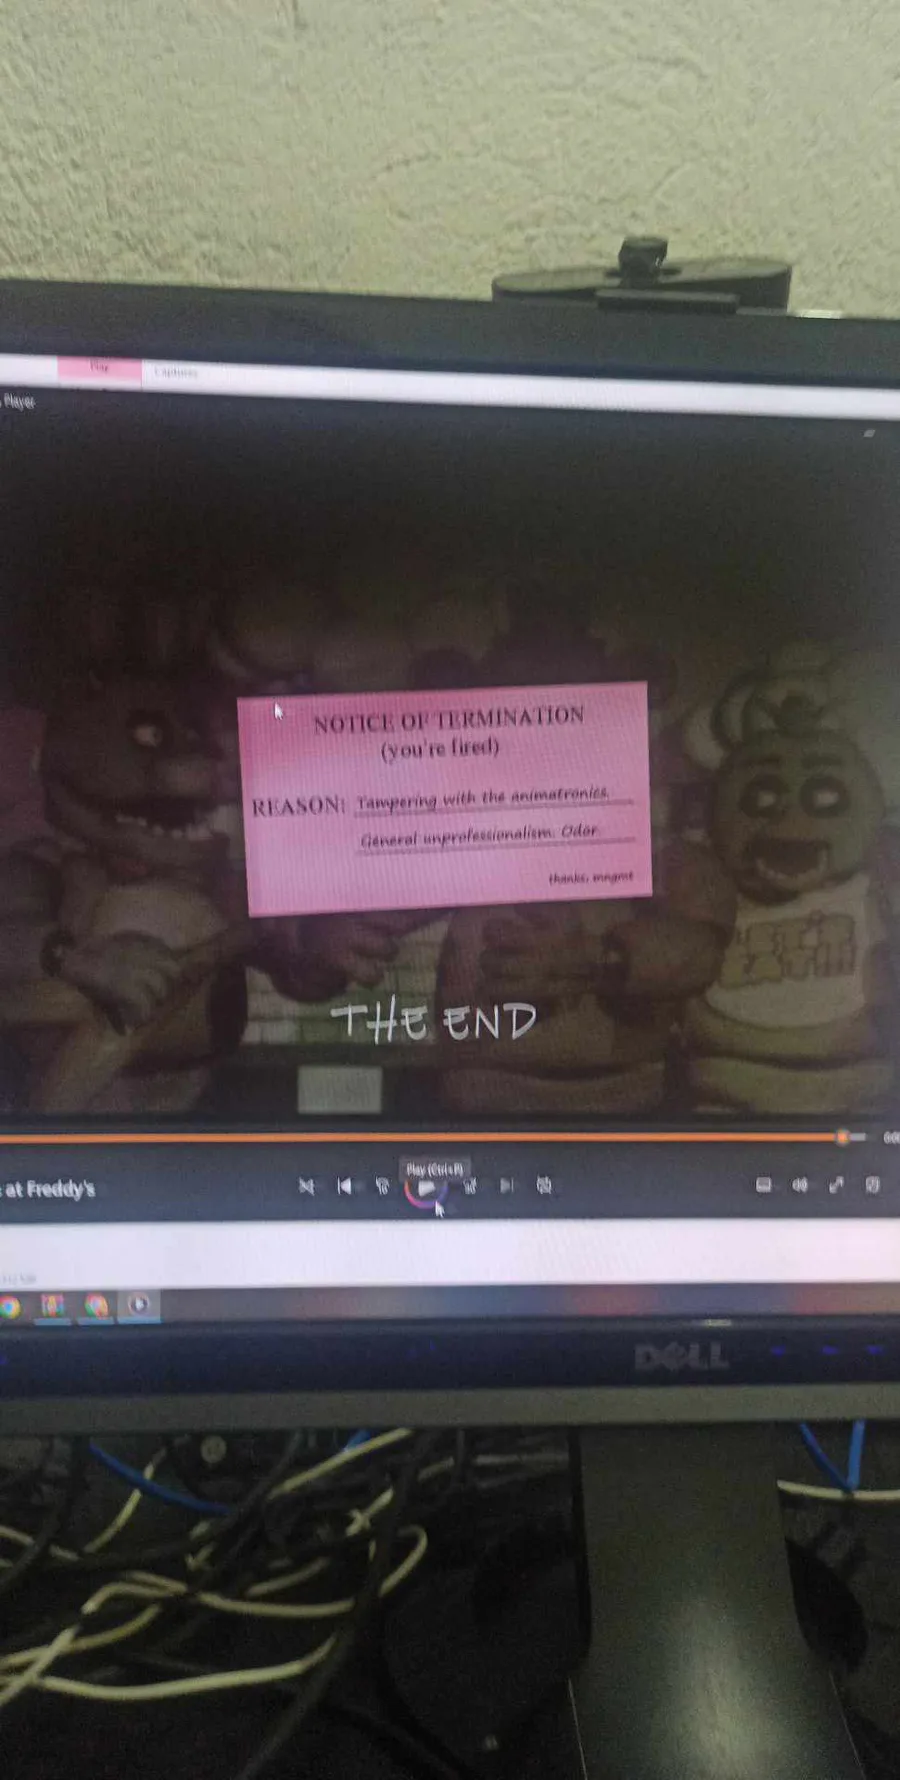 No Tampering achievement in Five Nights at Freddy's